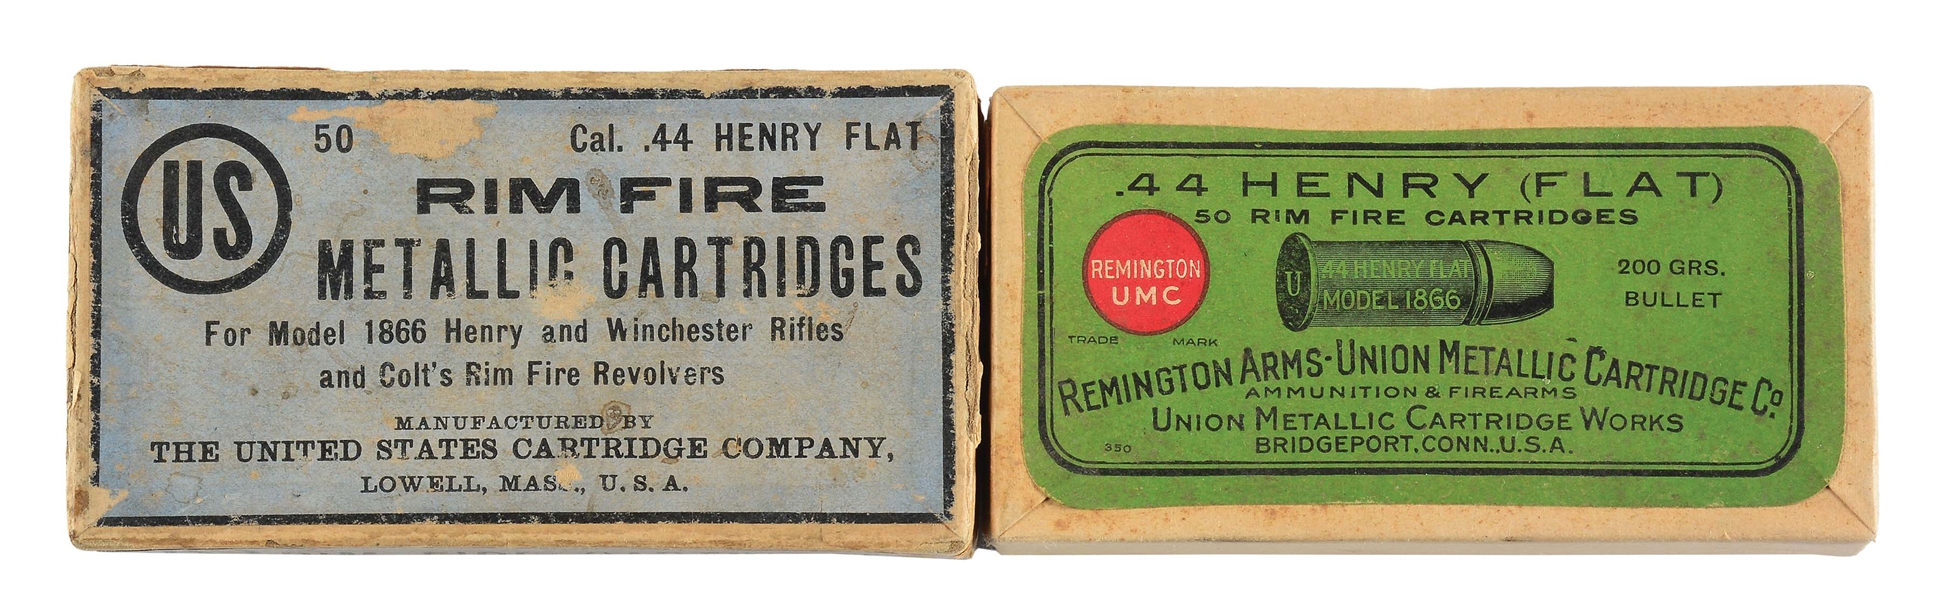 LOT OF 2: BOXES FOR .44 HENRY FLAT CARTRIDGES.